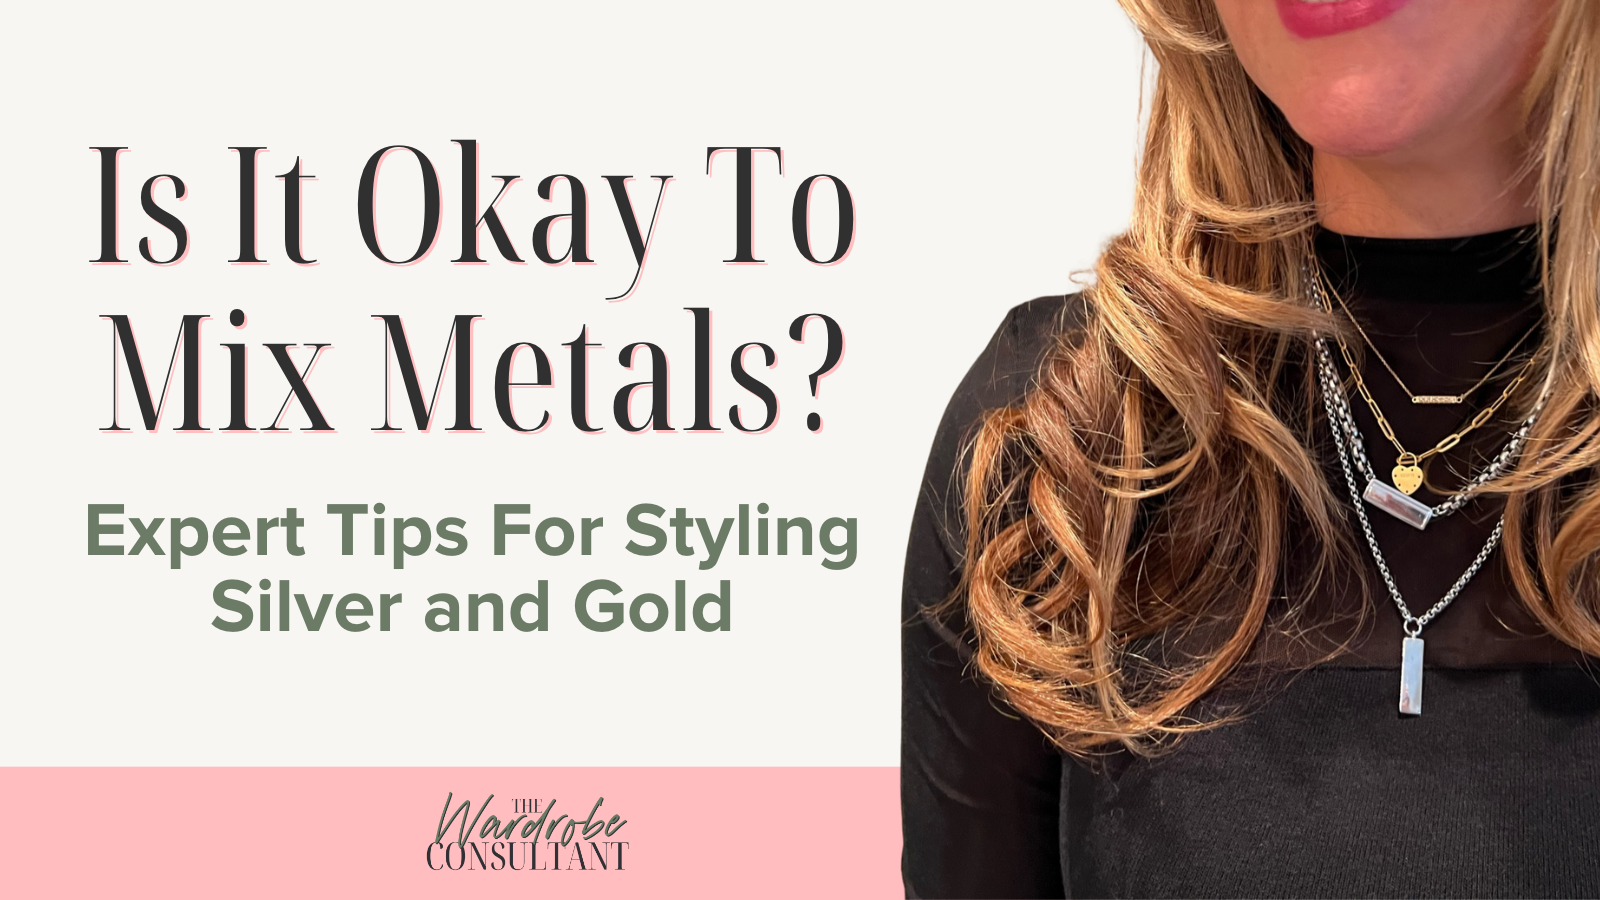 How to Wear Mixed Metal Jewelry: 5 Tips for Mixing Gold & Silver Jewelry